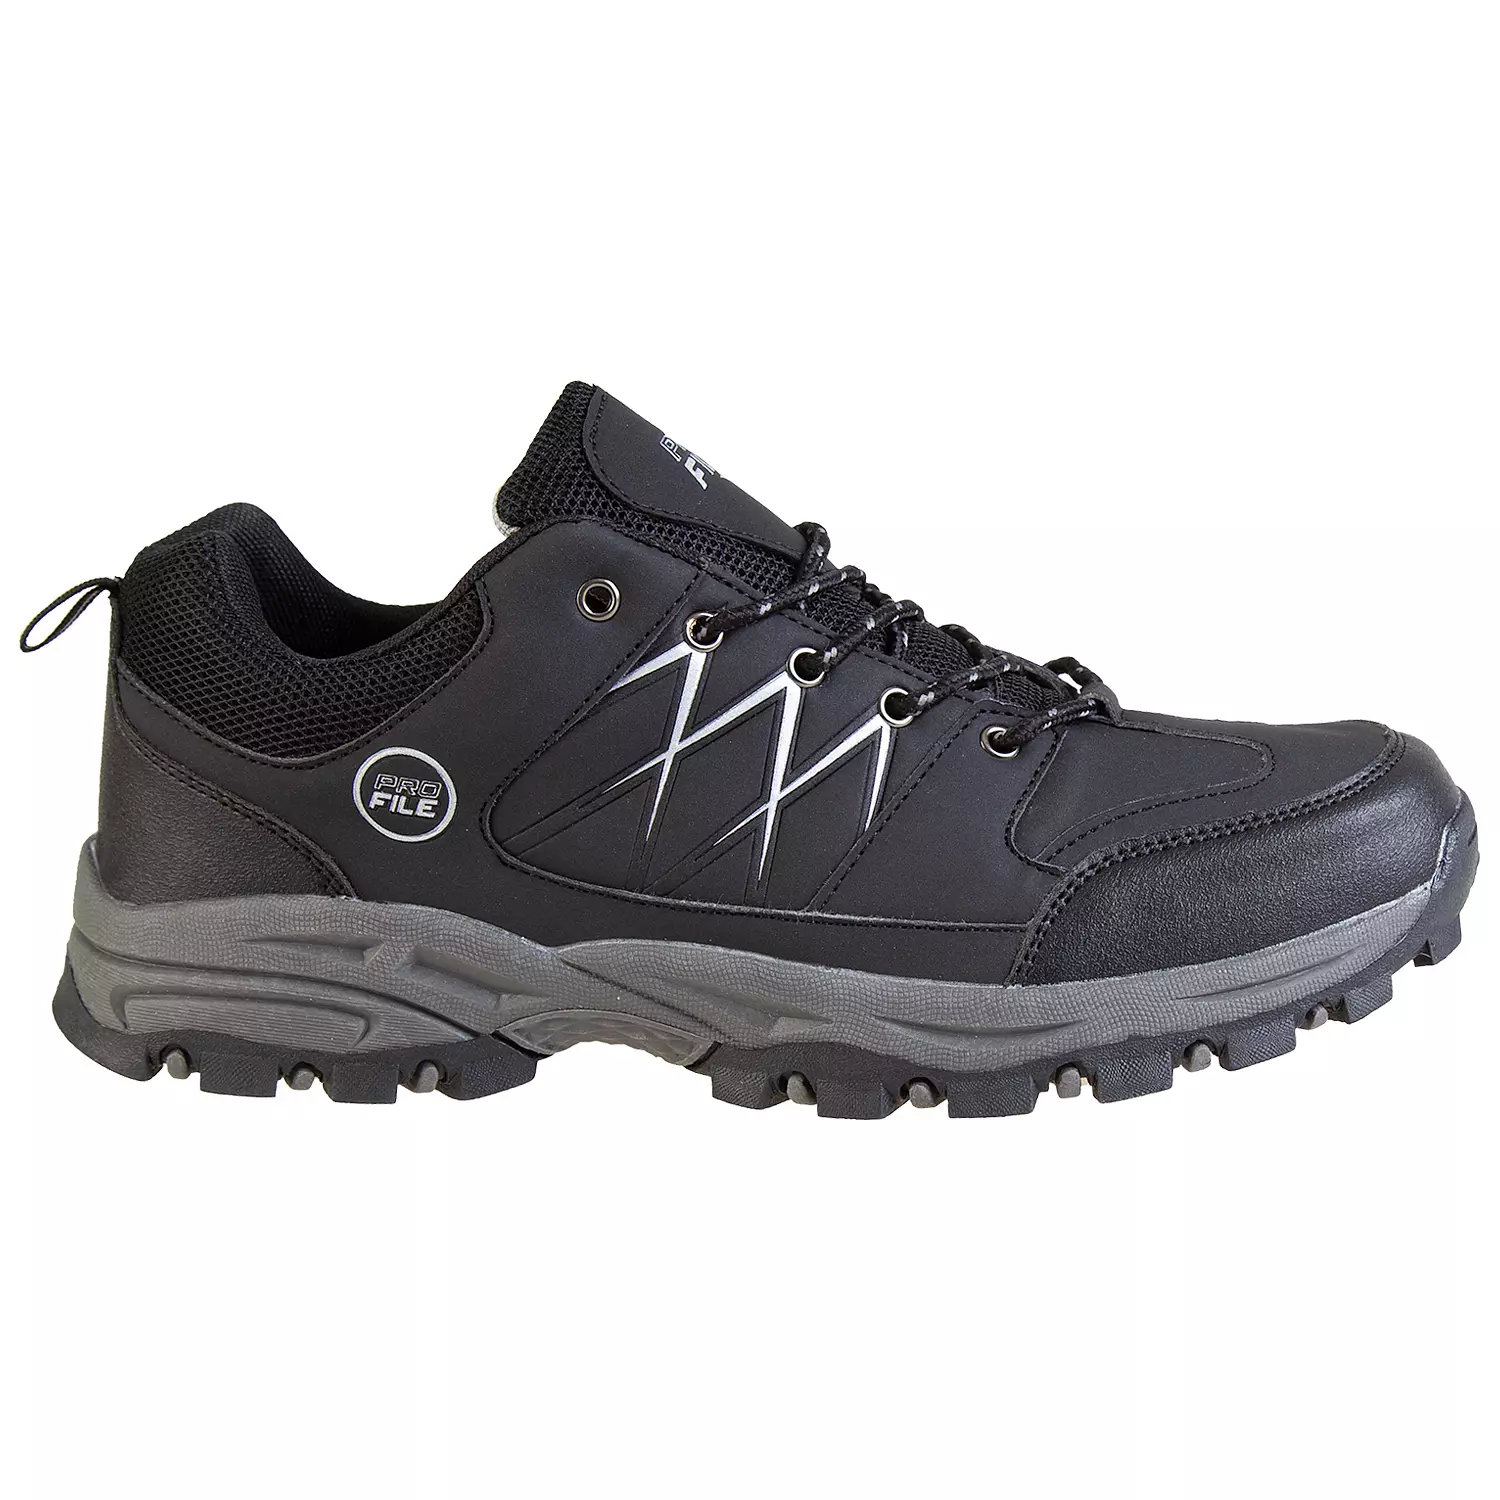 Men's low top hiking shoes with reflective strips, black, size 8